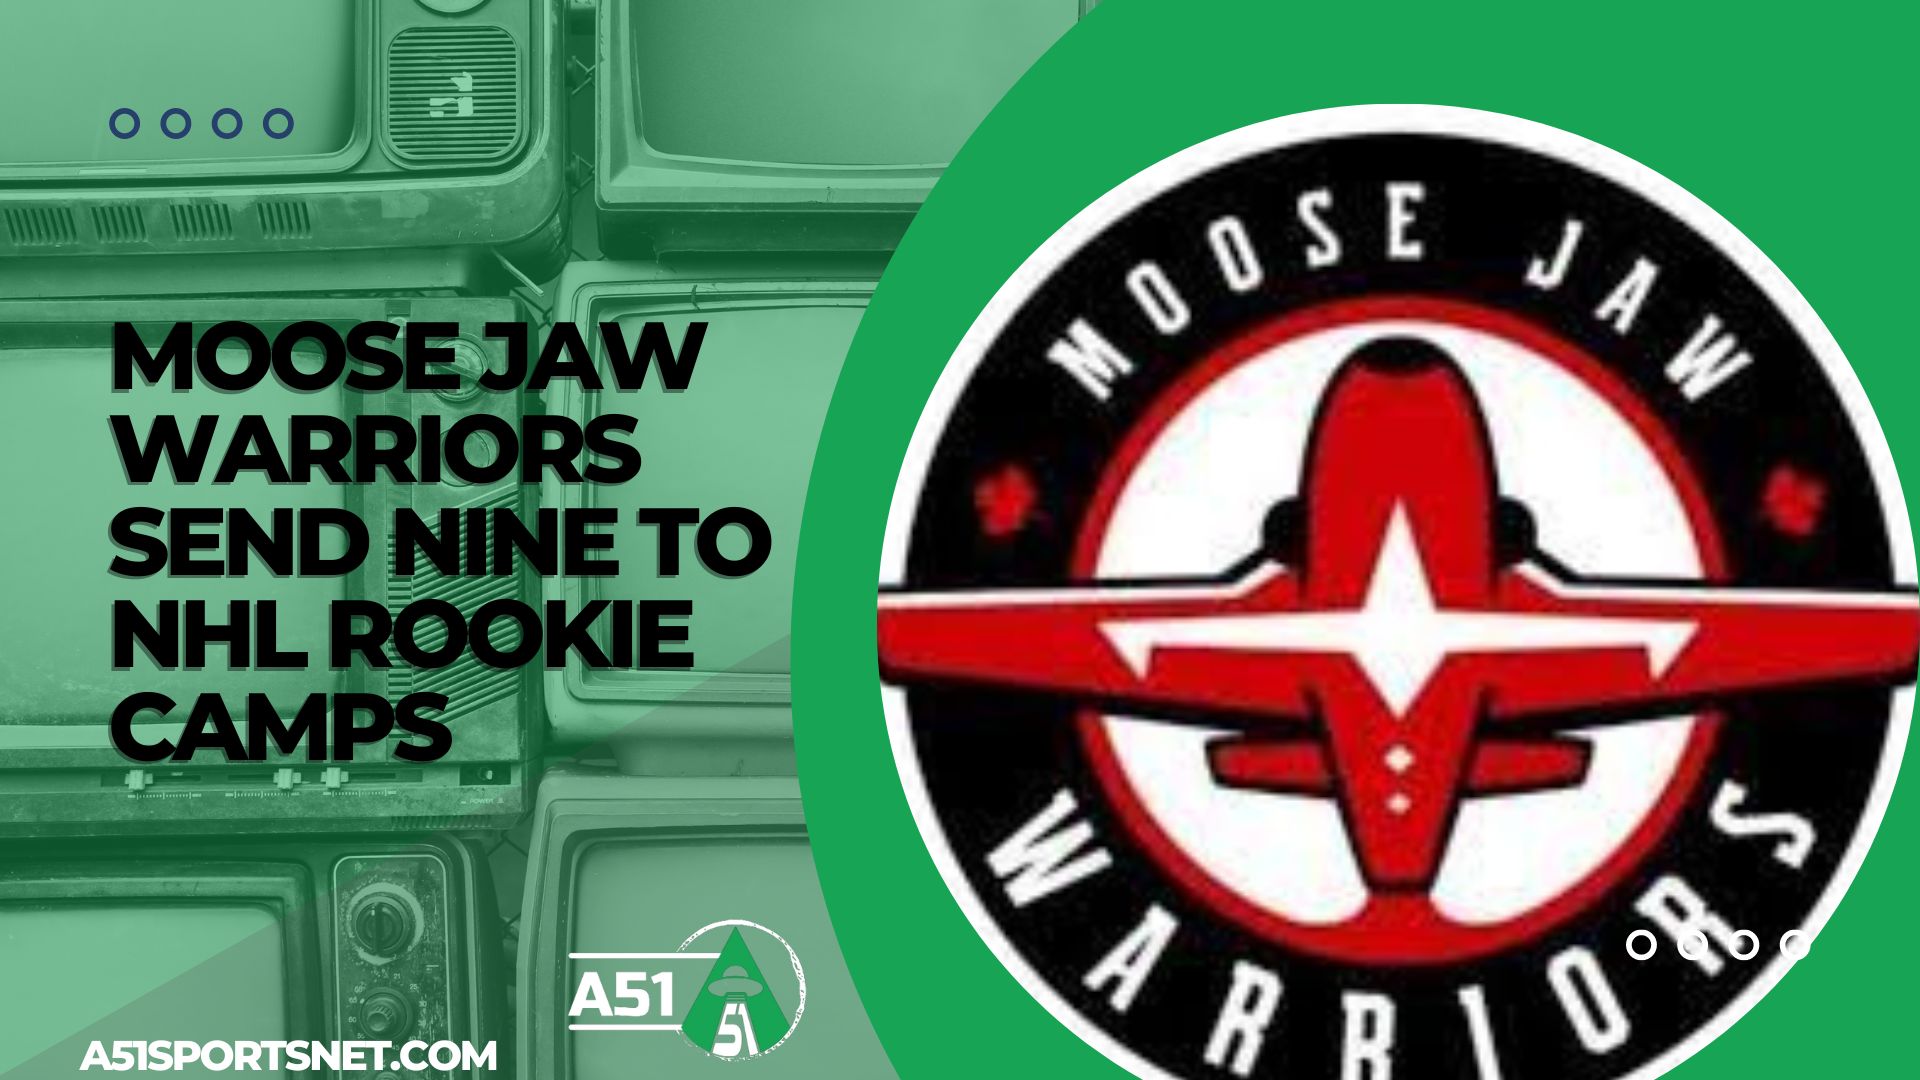 Moose Jaw Warriors send nine to NHL rookie camps